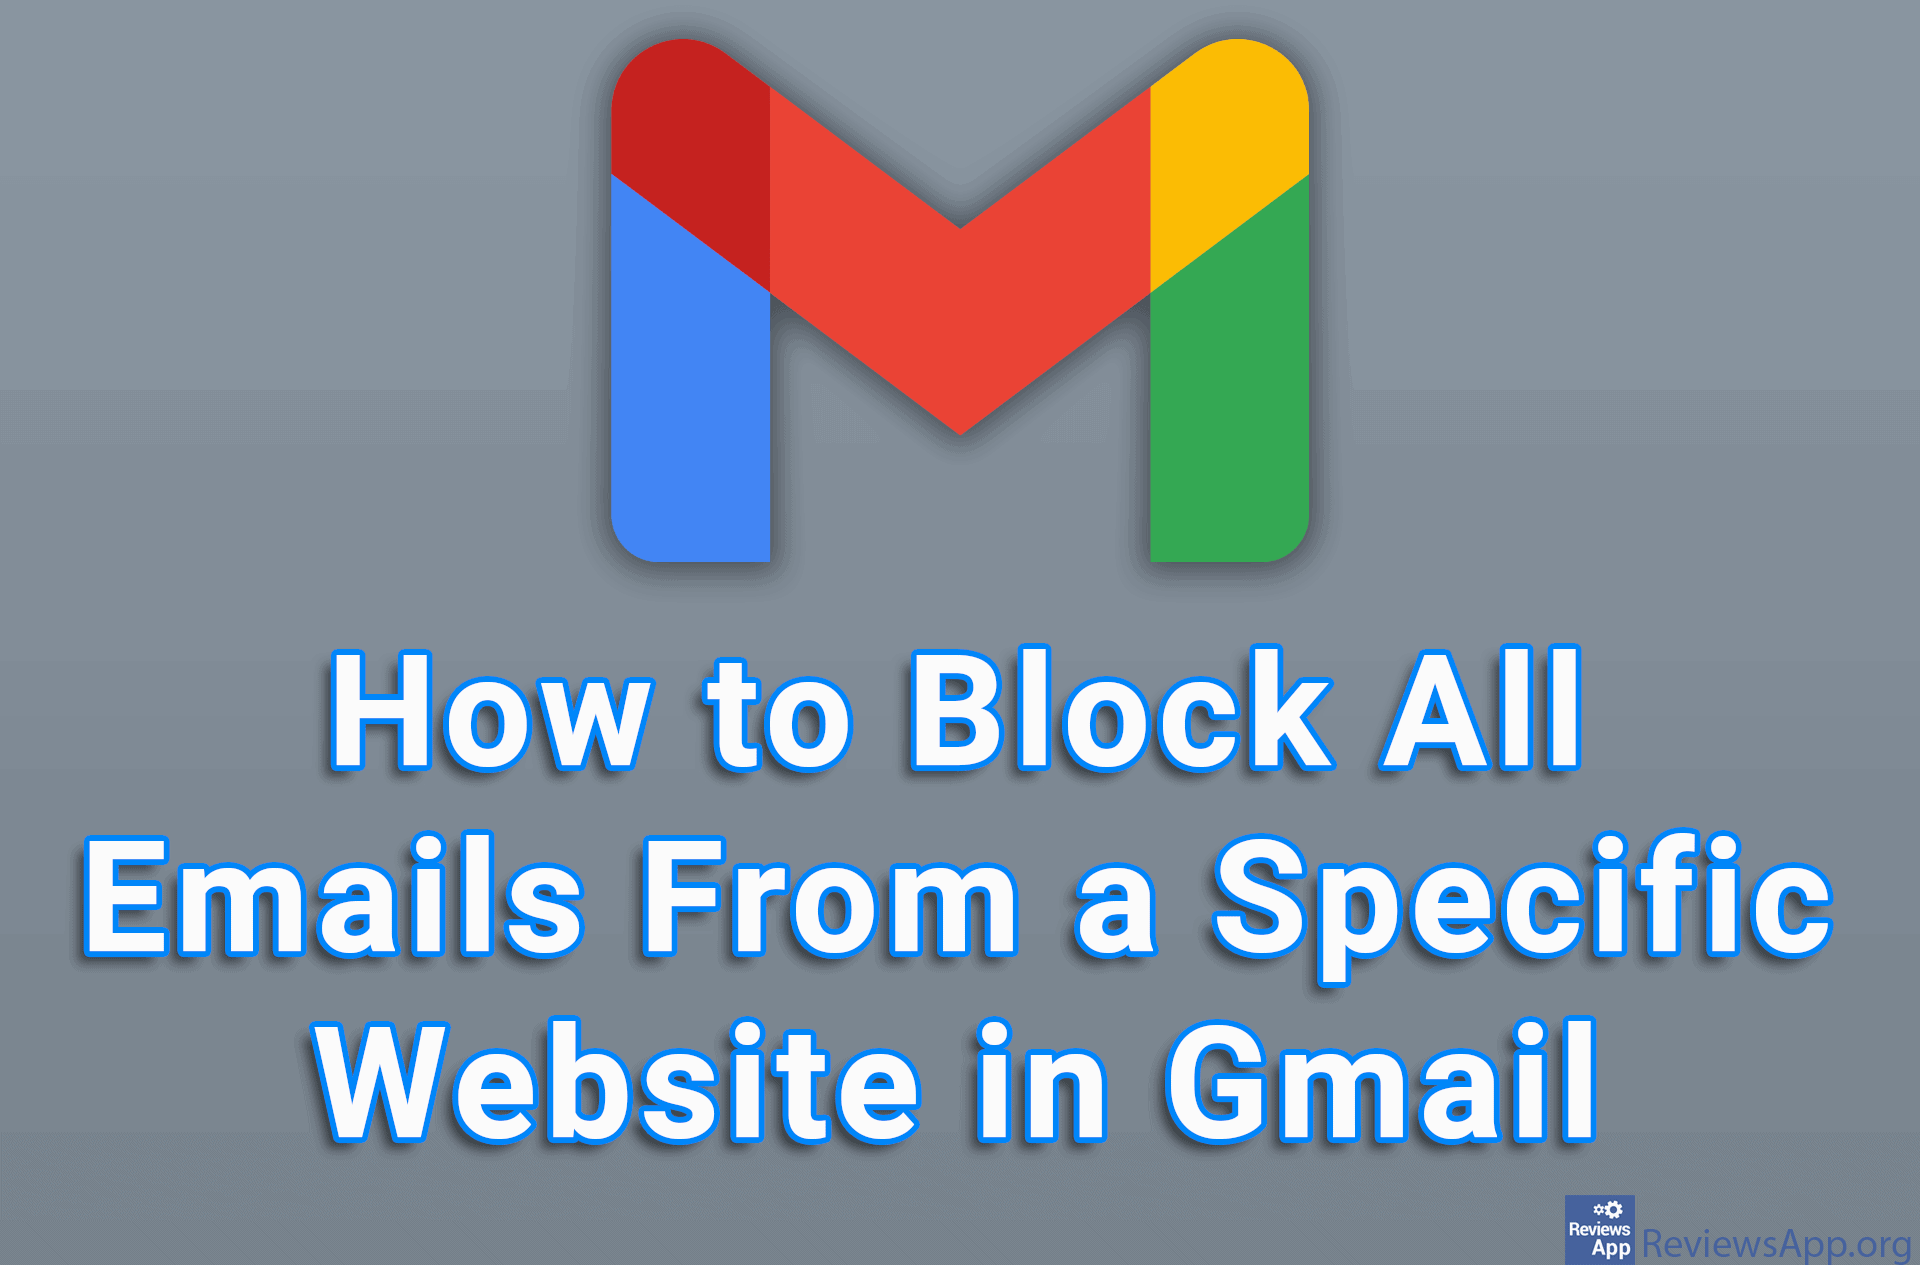 How to Block All Emails From a Specific Website in Gmail